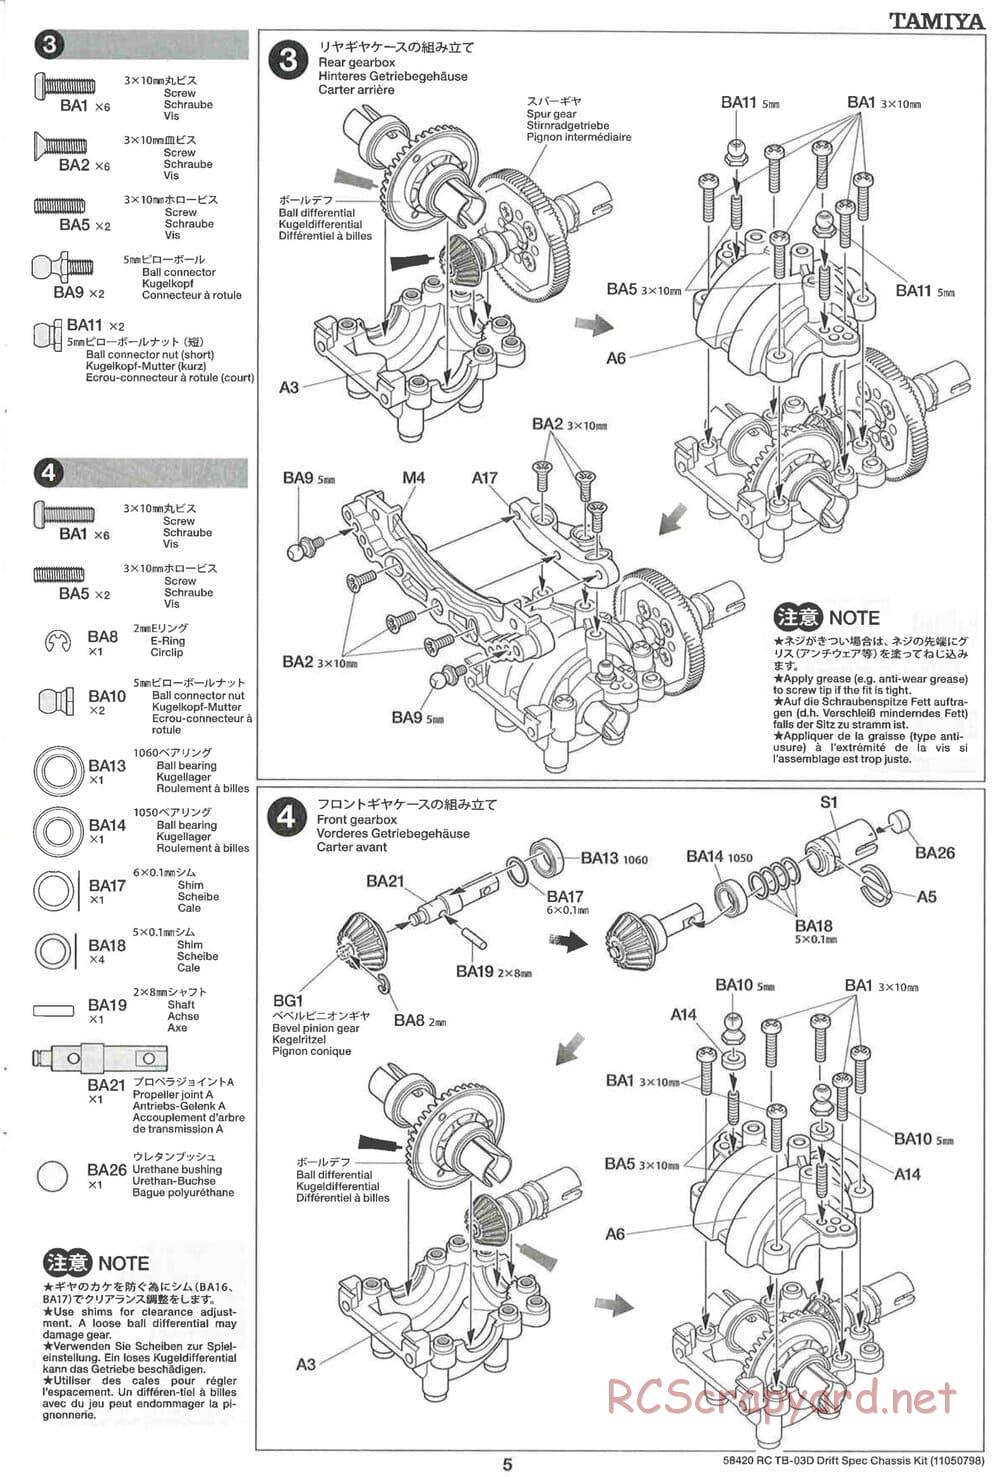 Tamiya - TB-03D HP Drift Spec Chassis - Manual - Page 5